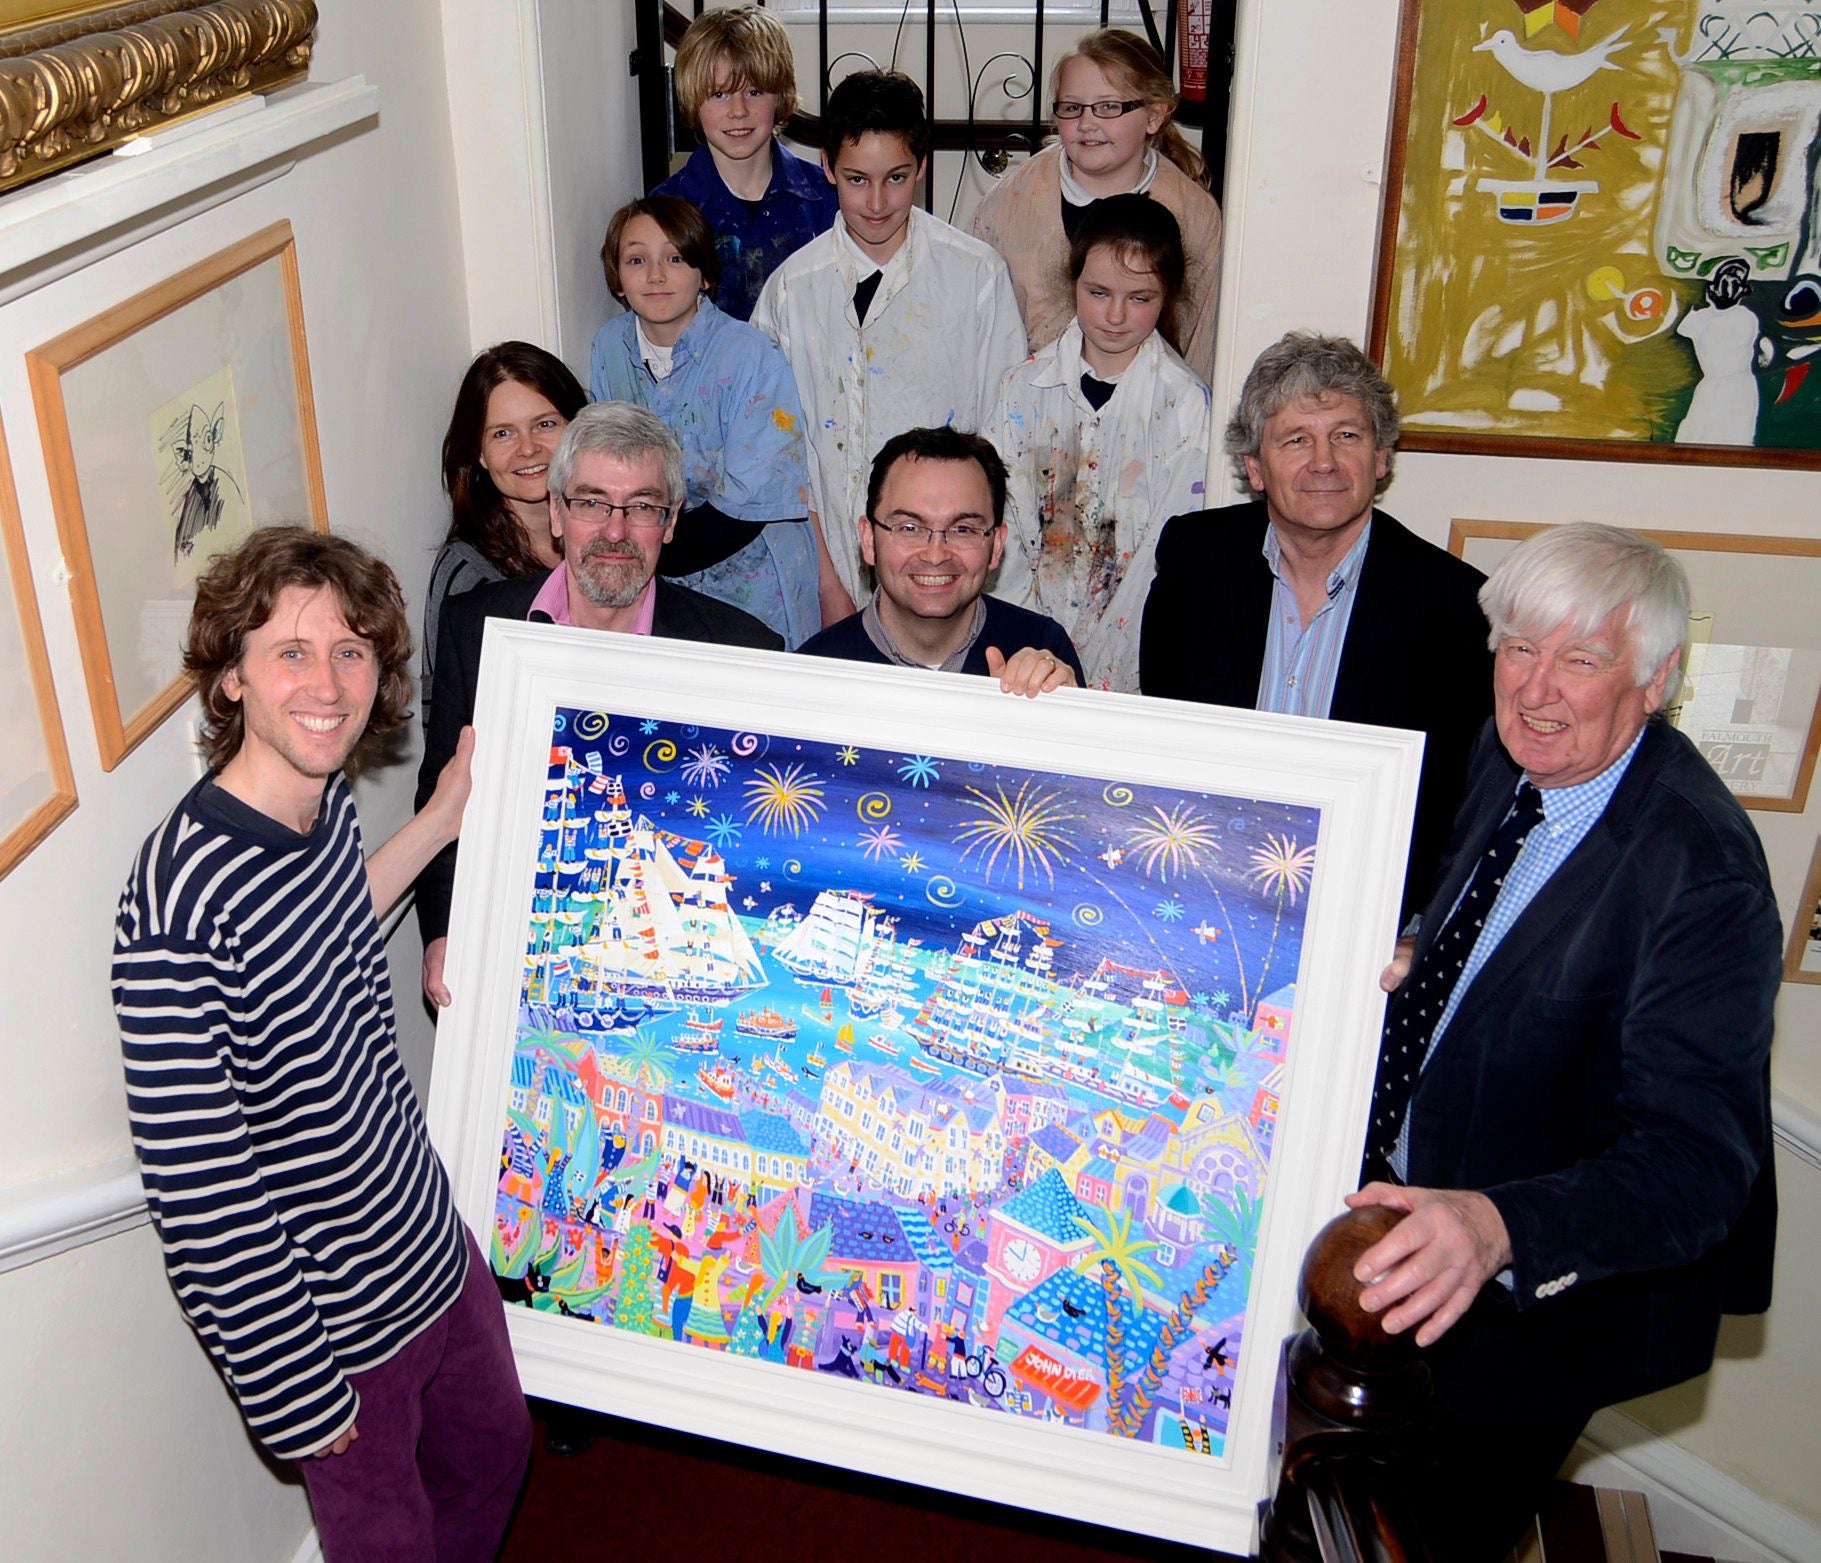 BIG Art, Tall Stories and Big Tall Ships - National competition launched